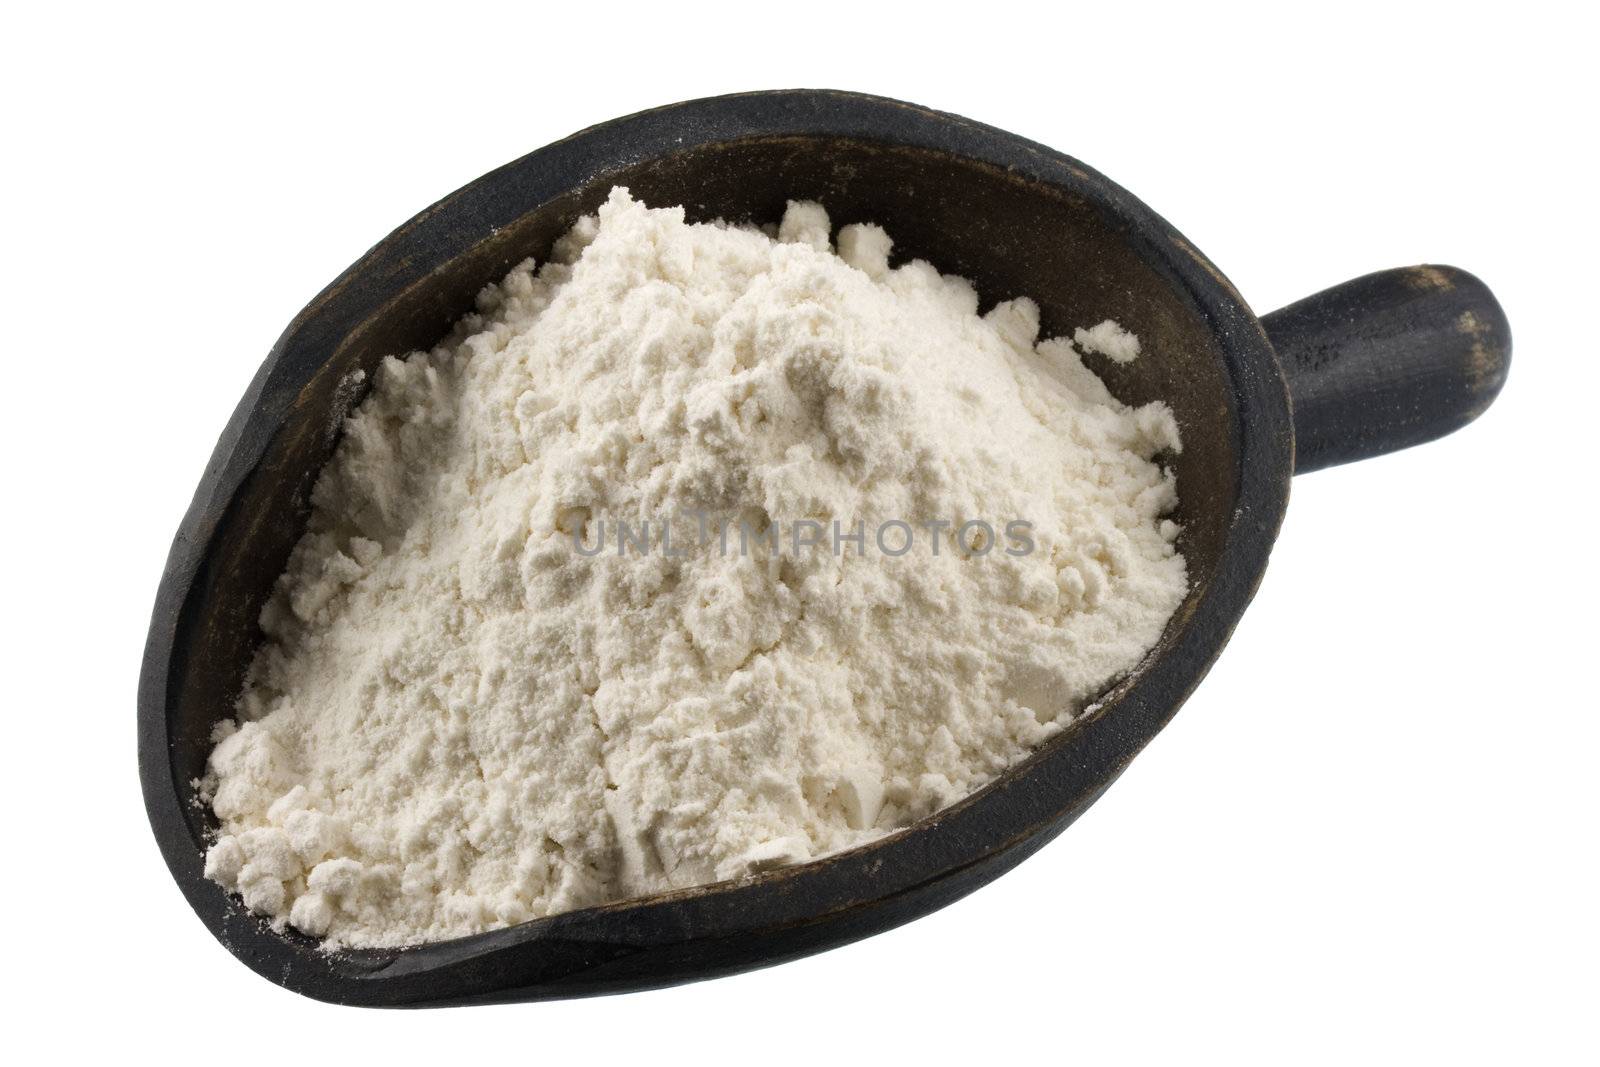 white wheat flour on a rustic, wooden scoop, isolated